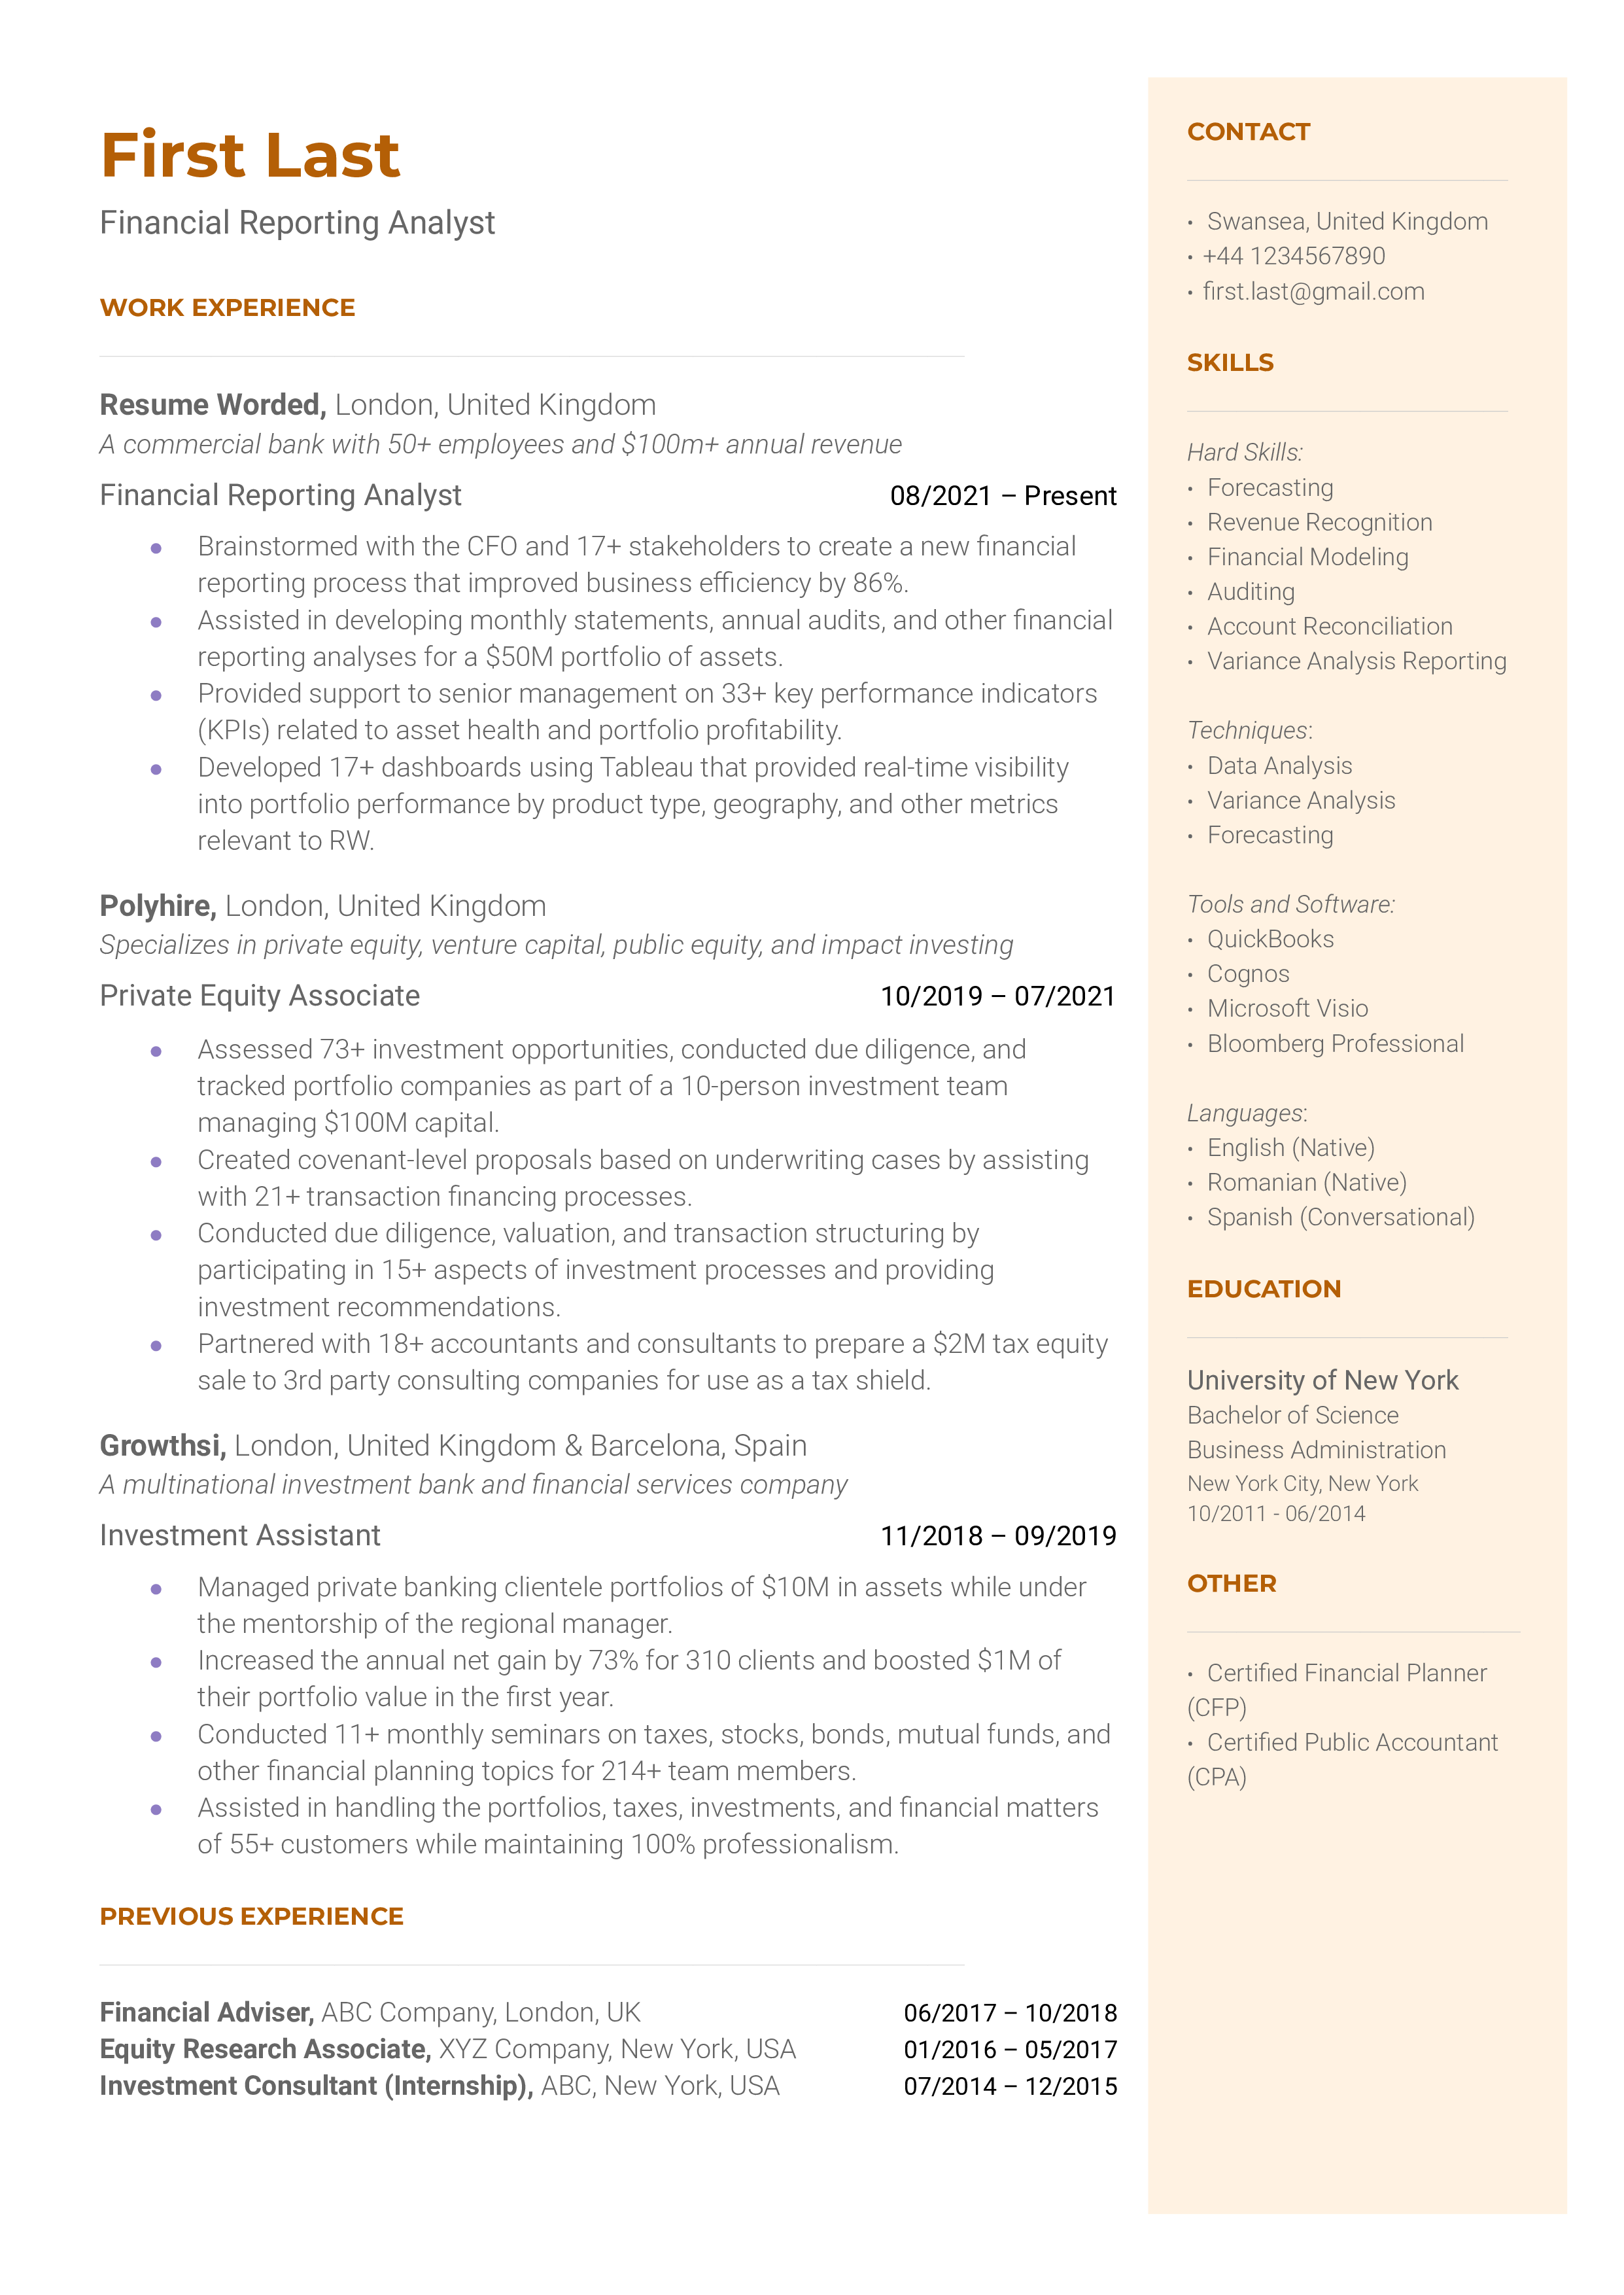 A financial reporting analyst resume template including a wide variety of hard skills 